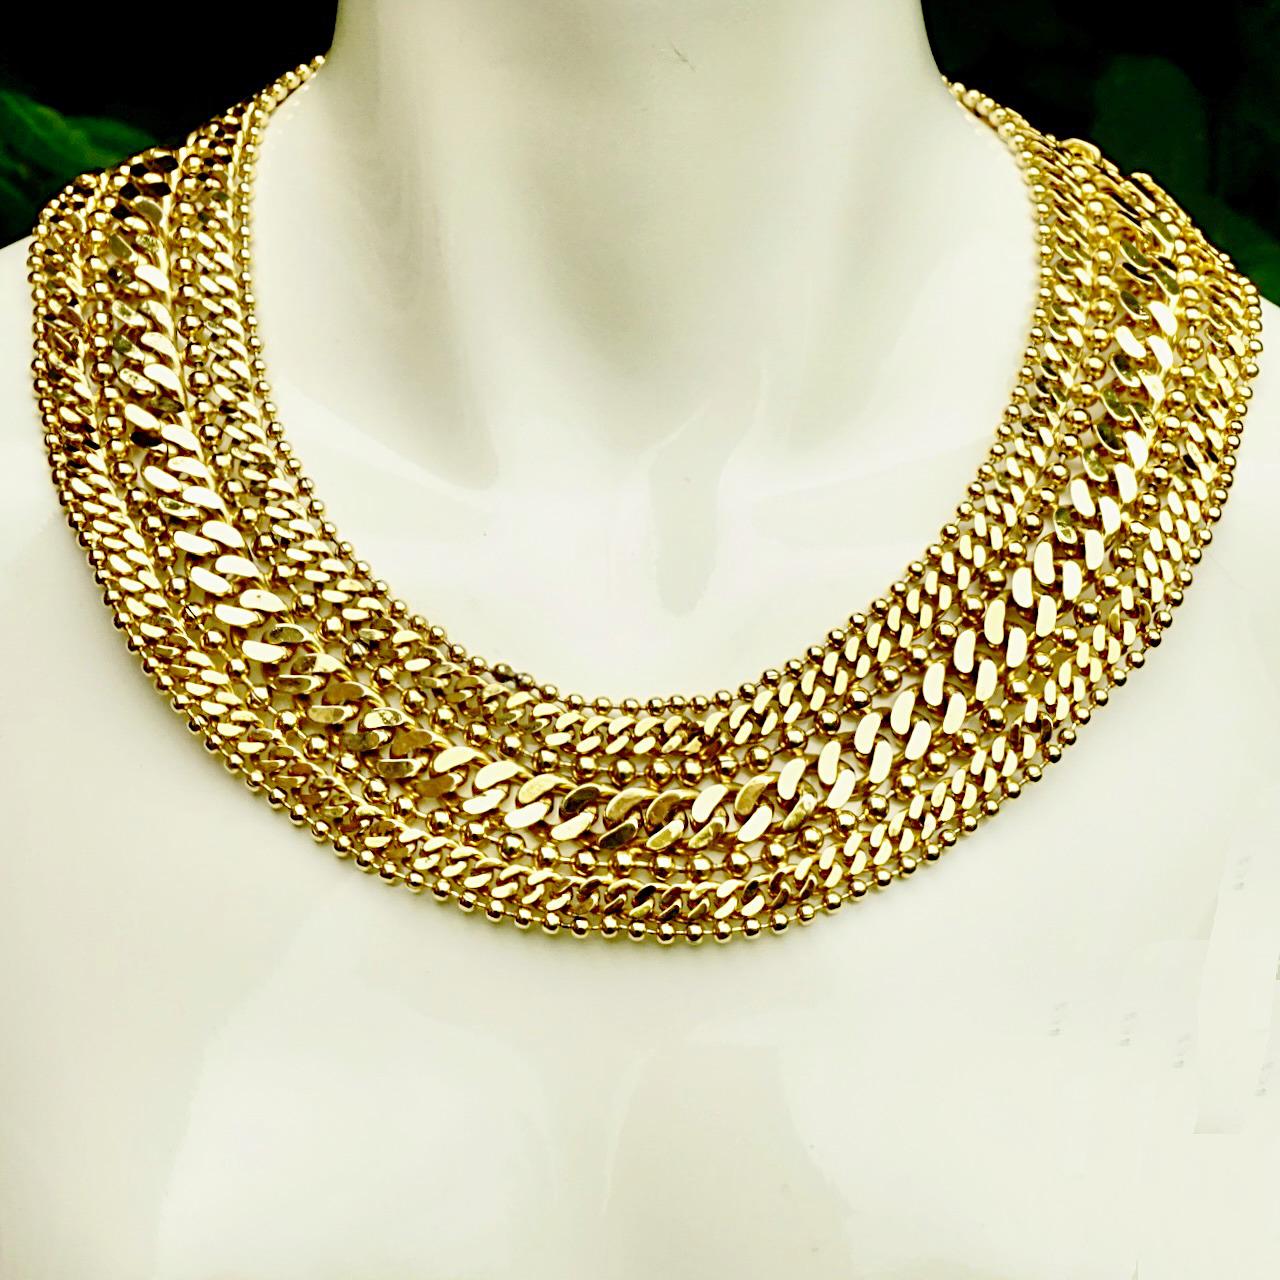 Monet Gold Plated Curb and Ball Link Chain Collar Necklace circa 1980s In Good Condition For Sale In London, GB